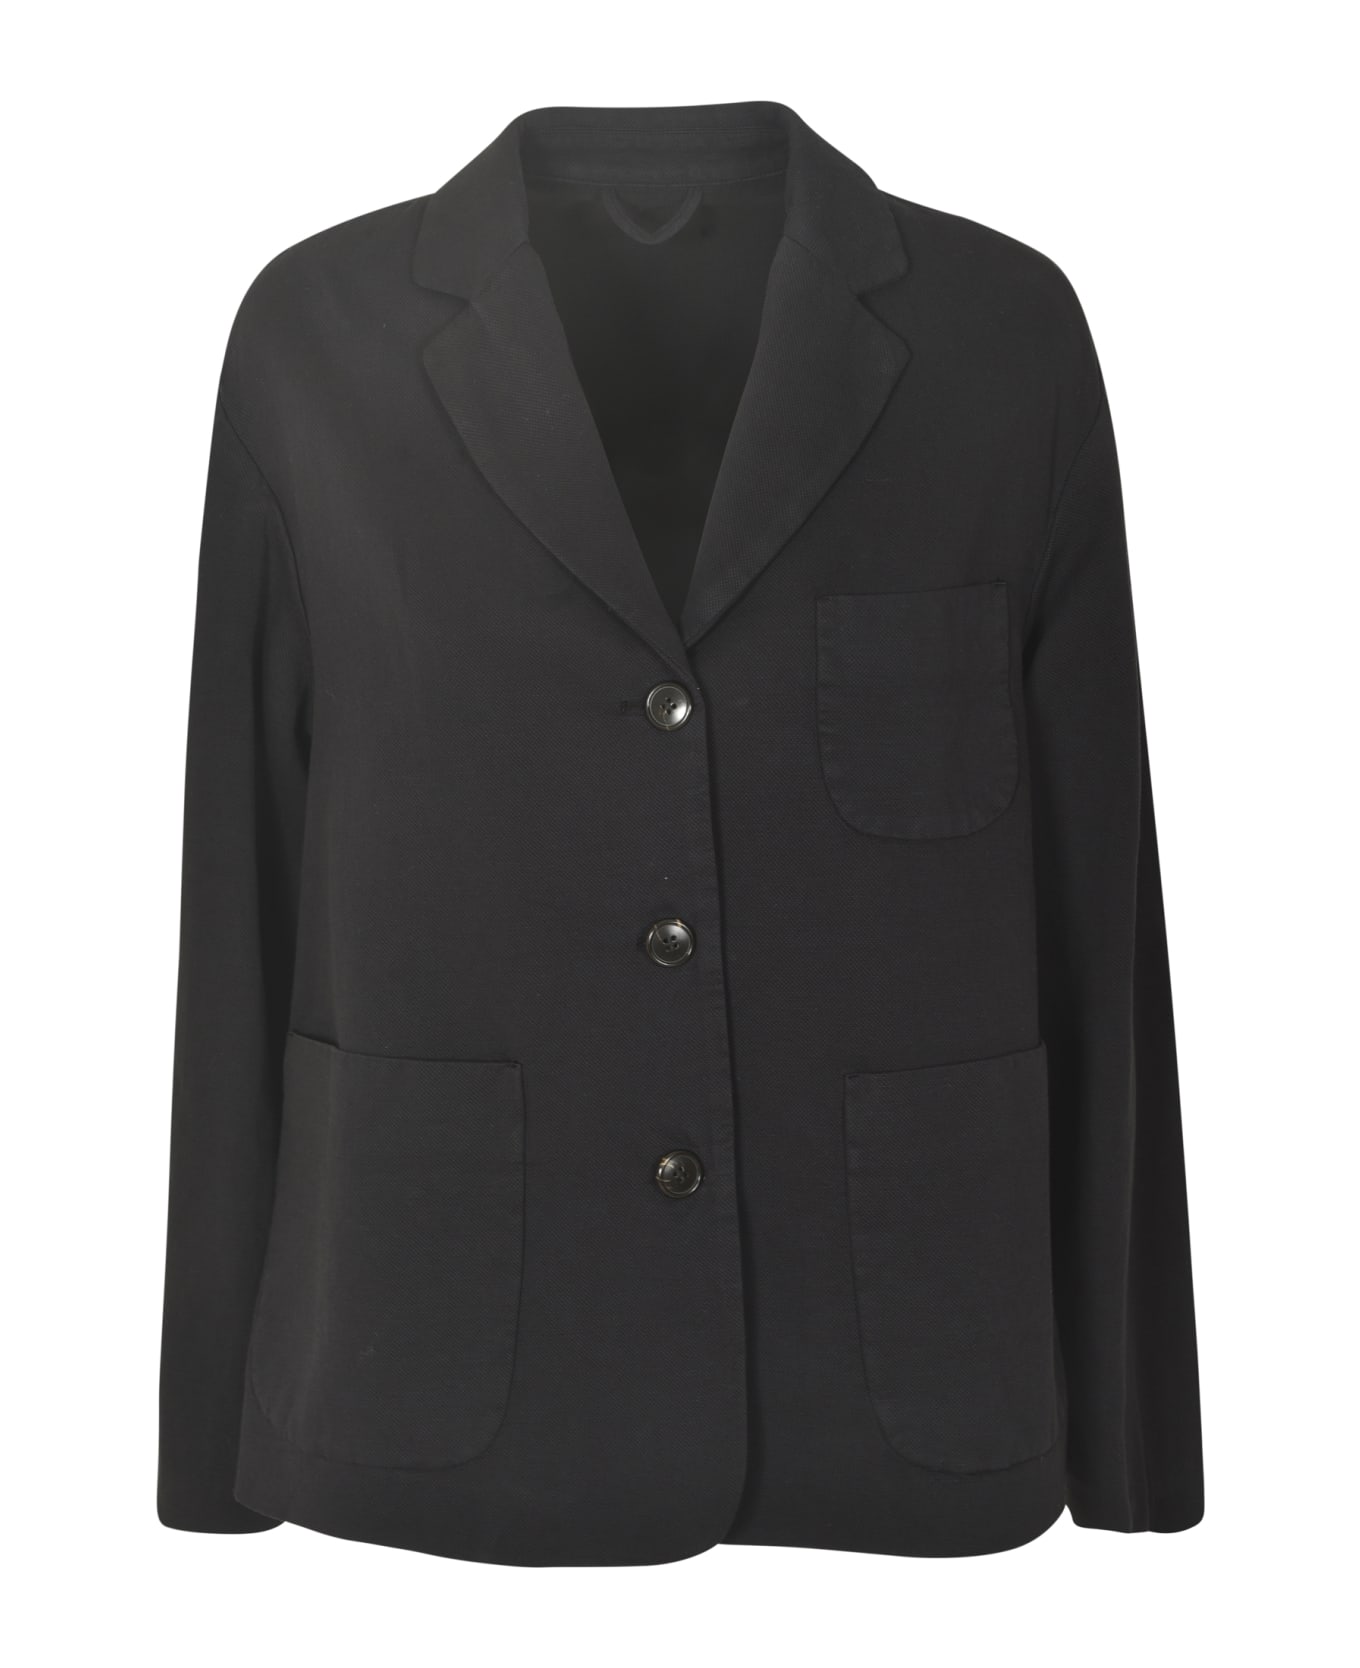 Kiltie Patched Pocket Buttoned Jacket - Black ブレザー